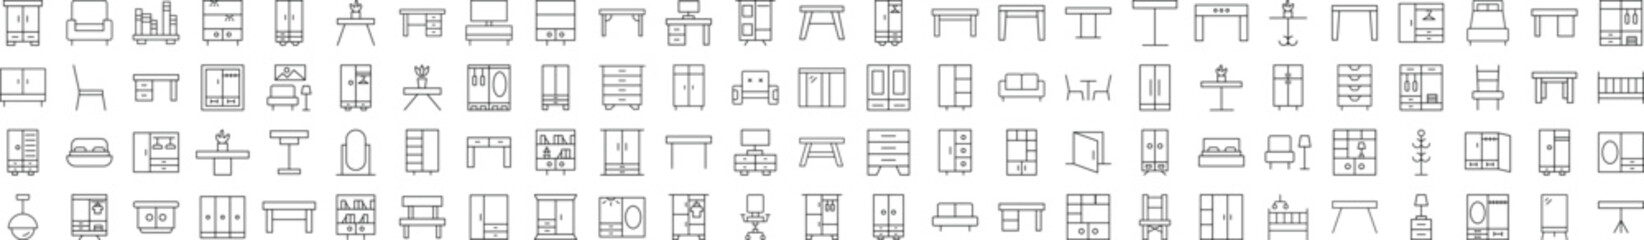 Furniture Linear Icons. Perfect for design, infographics, web sites, apps.